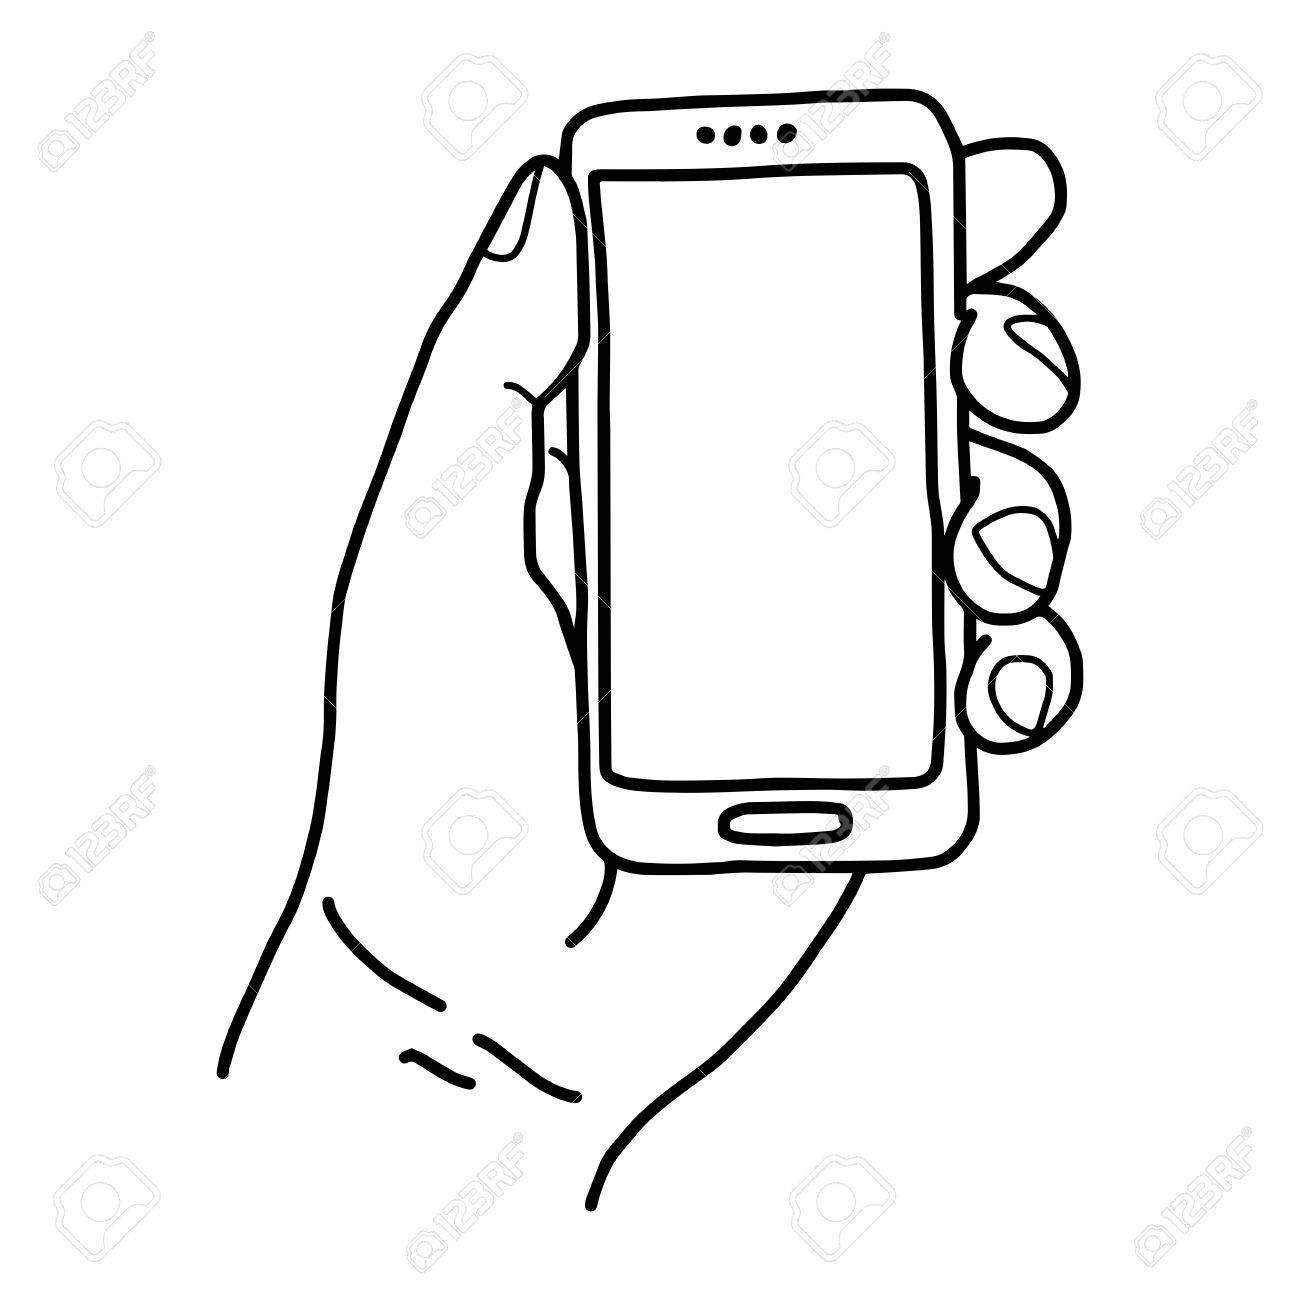 Cellphone clipart drawing. Cell phones at getdrawings